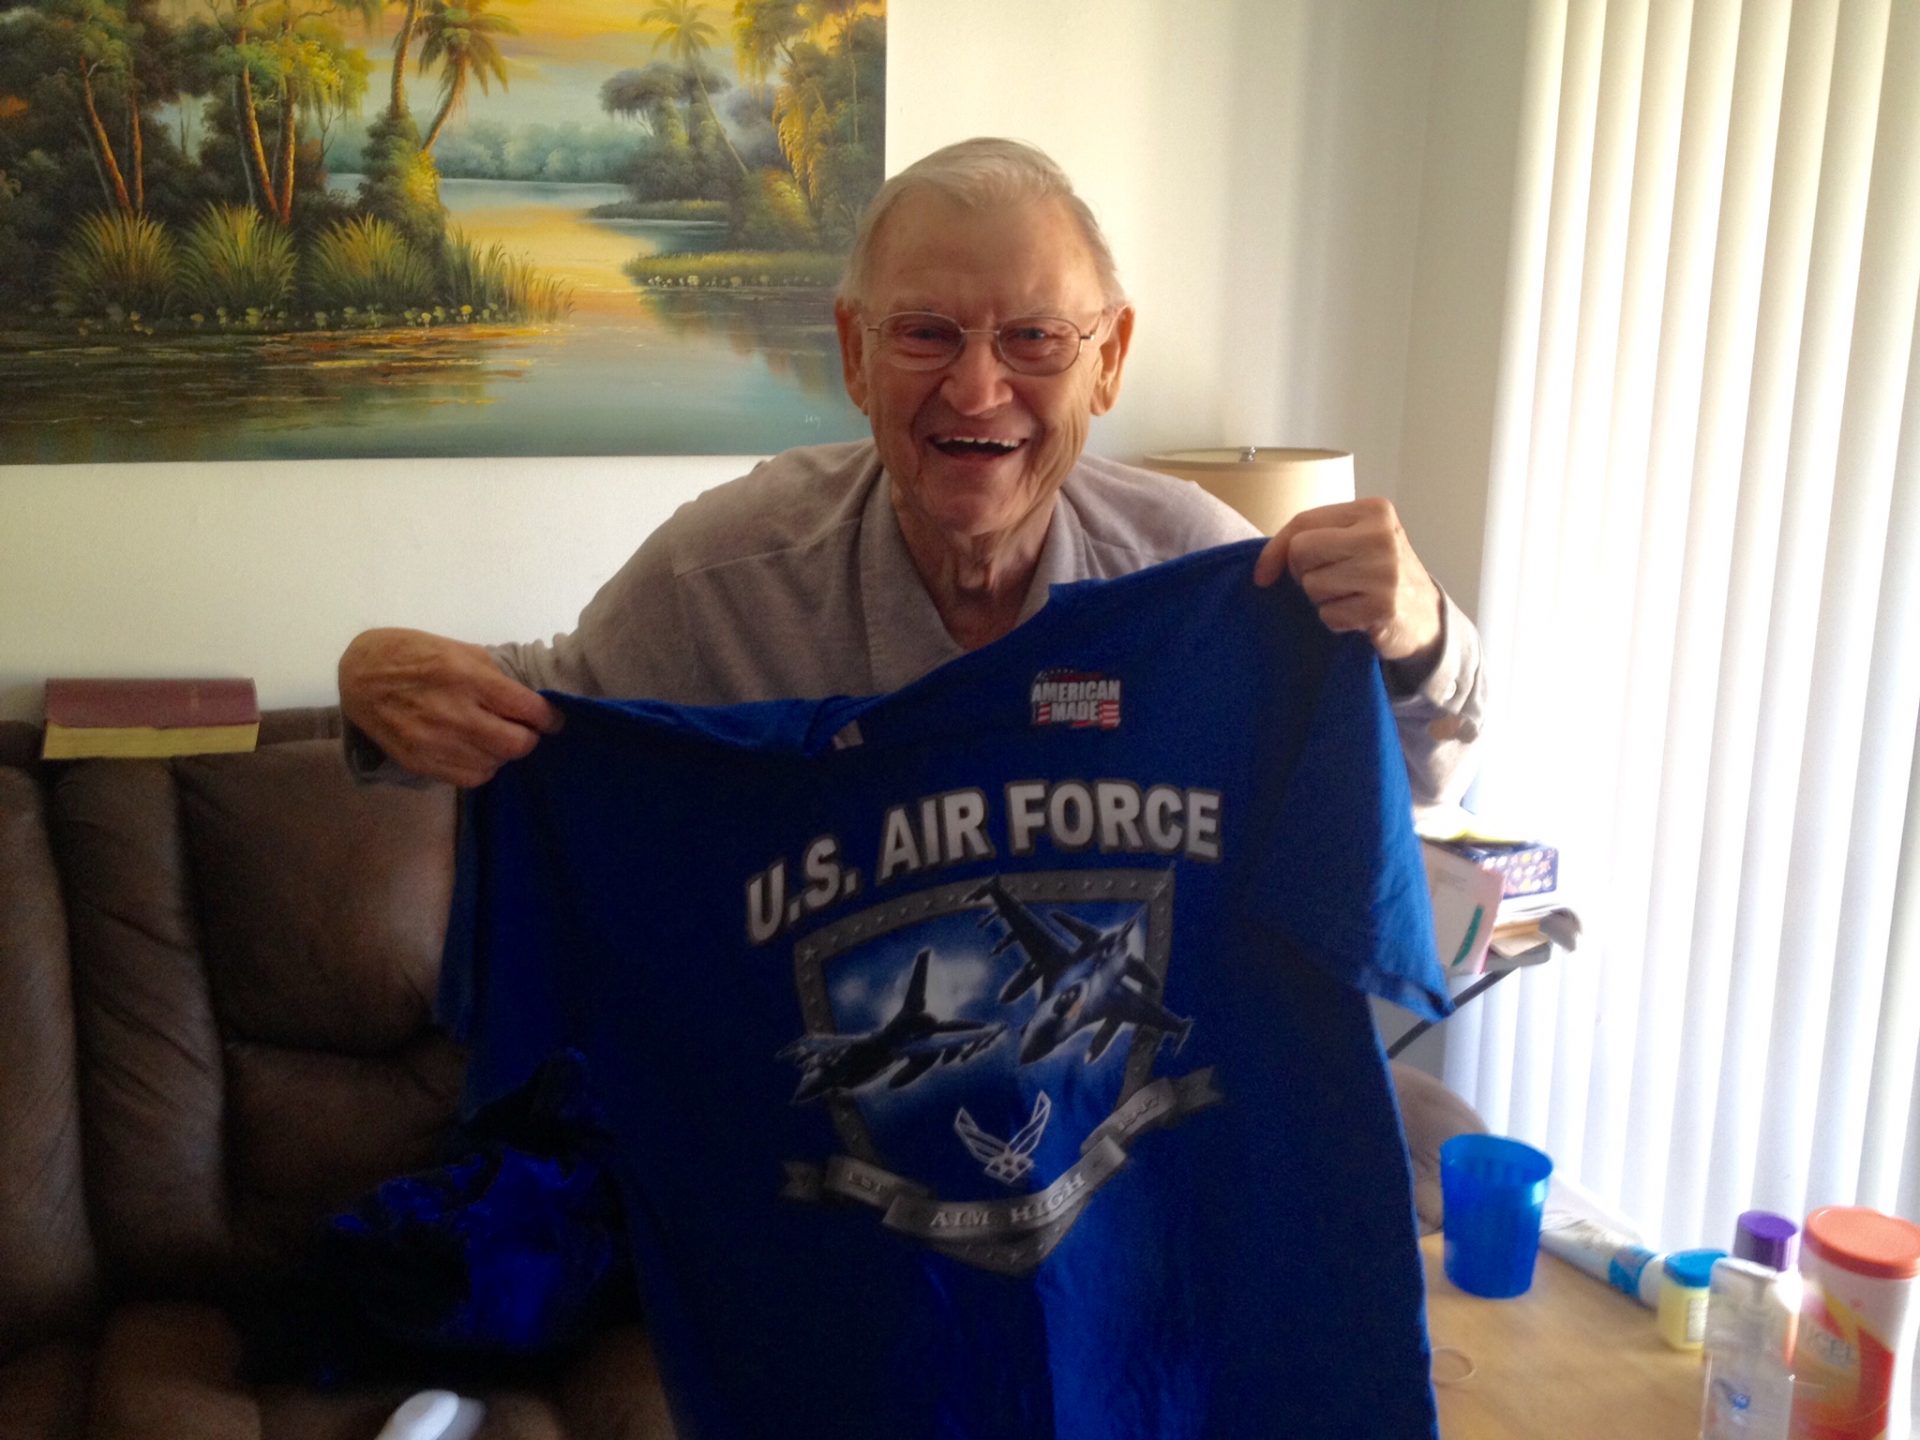 Dad with an Air Force shirt I bought him .